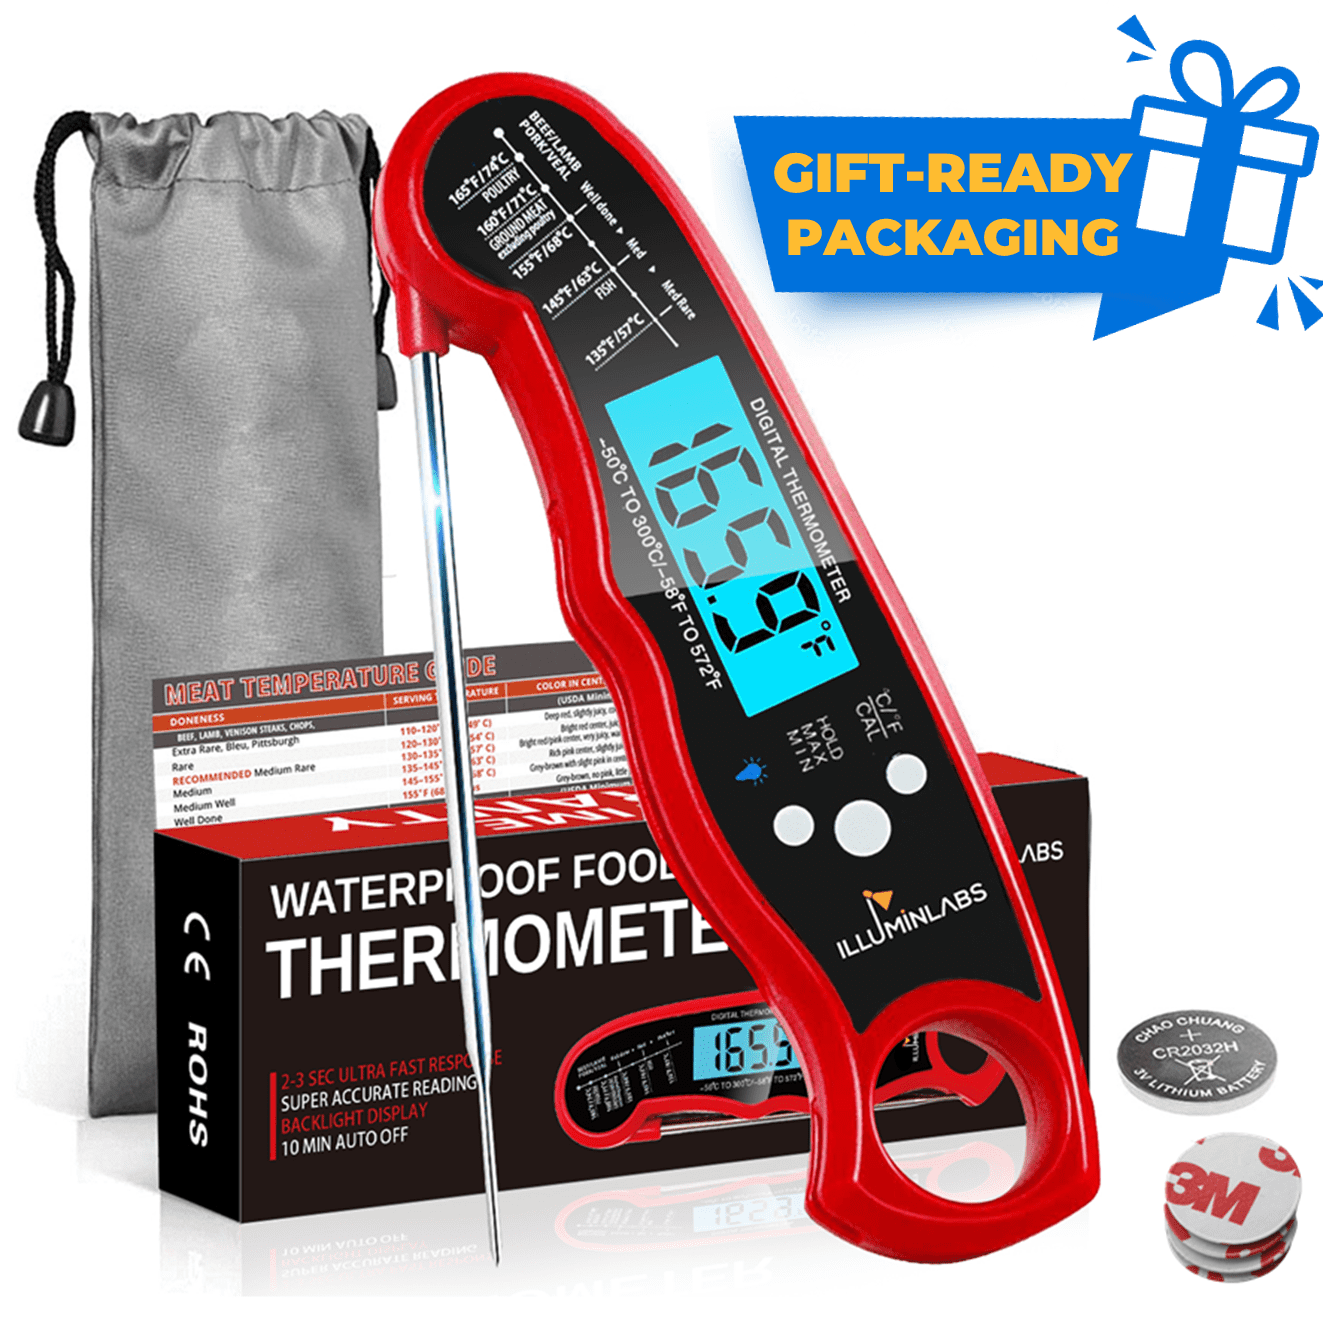 Digital Instant Read Meat Thermometer, Thermometer Cooking, Kitchen Food Thermometer with 4.6 Long Probes, 2.5” Waterproof Digital Grill